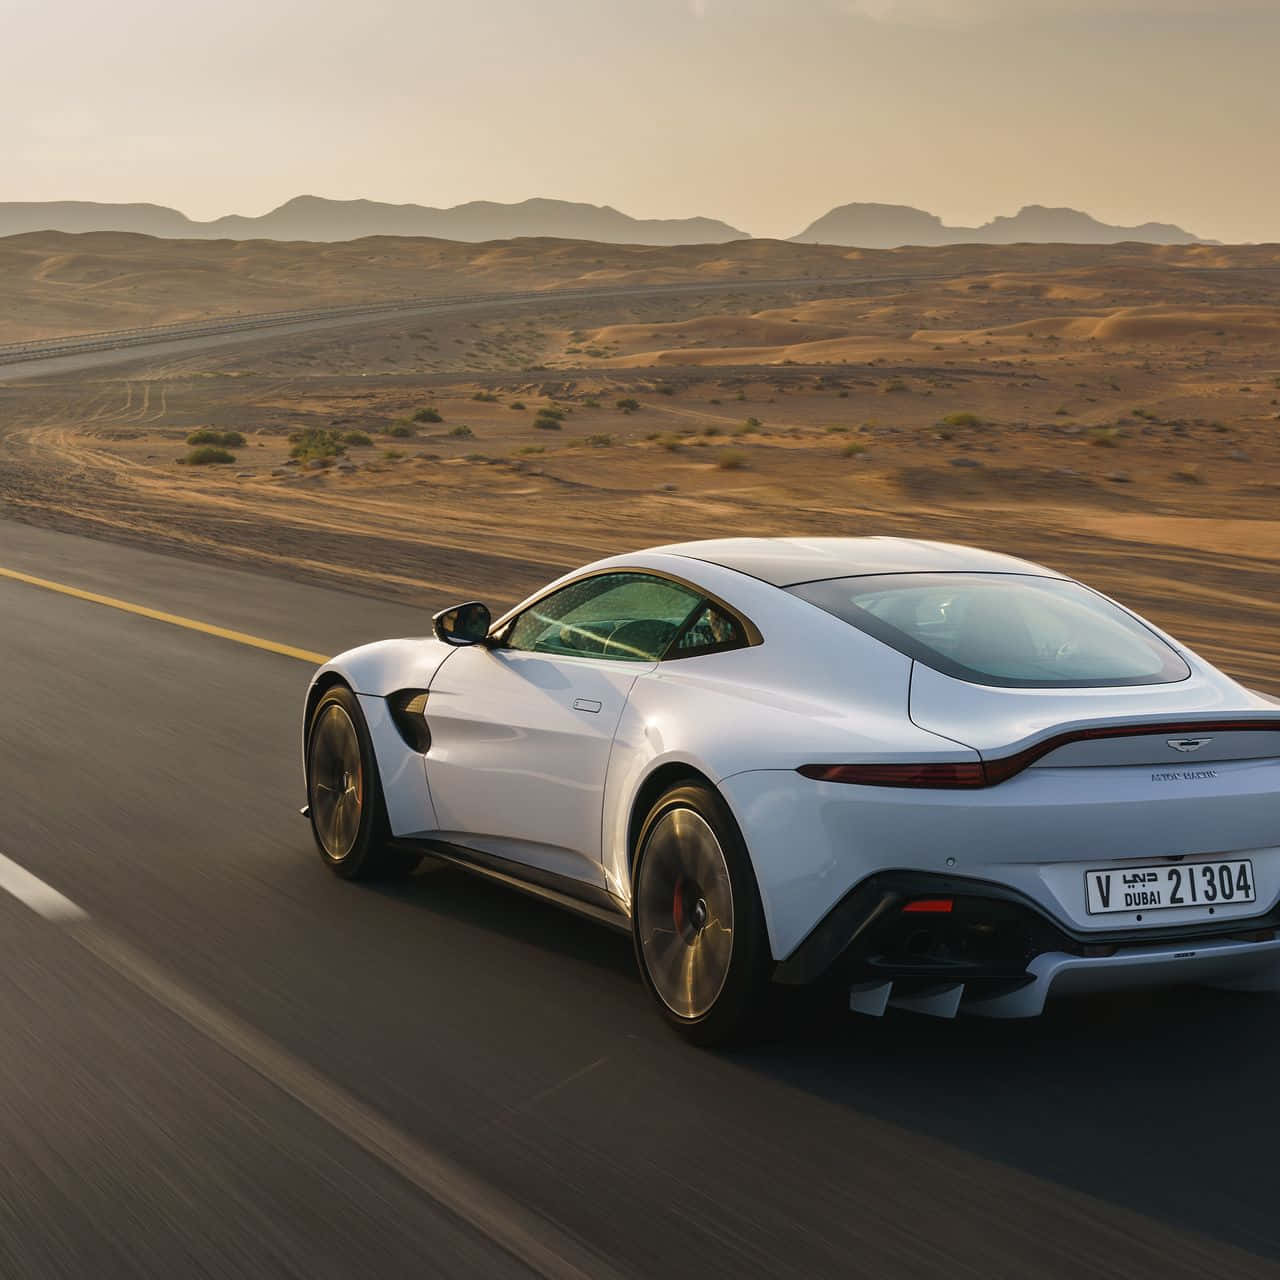 Experience the thrill of driving an Aston Martin